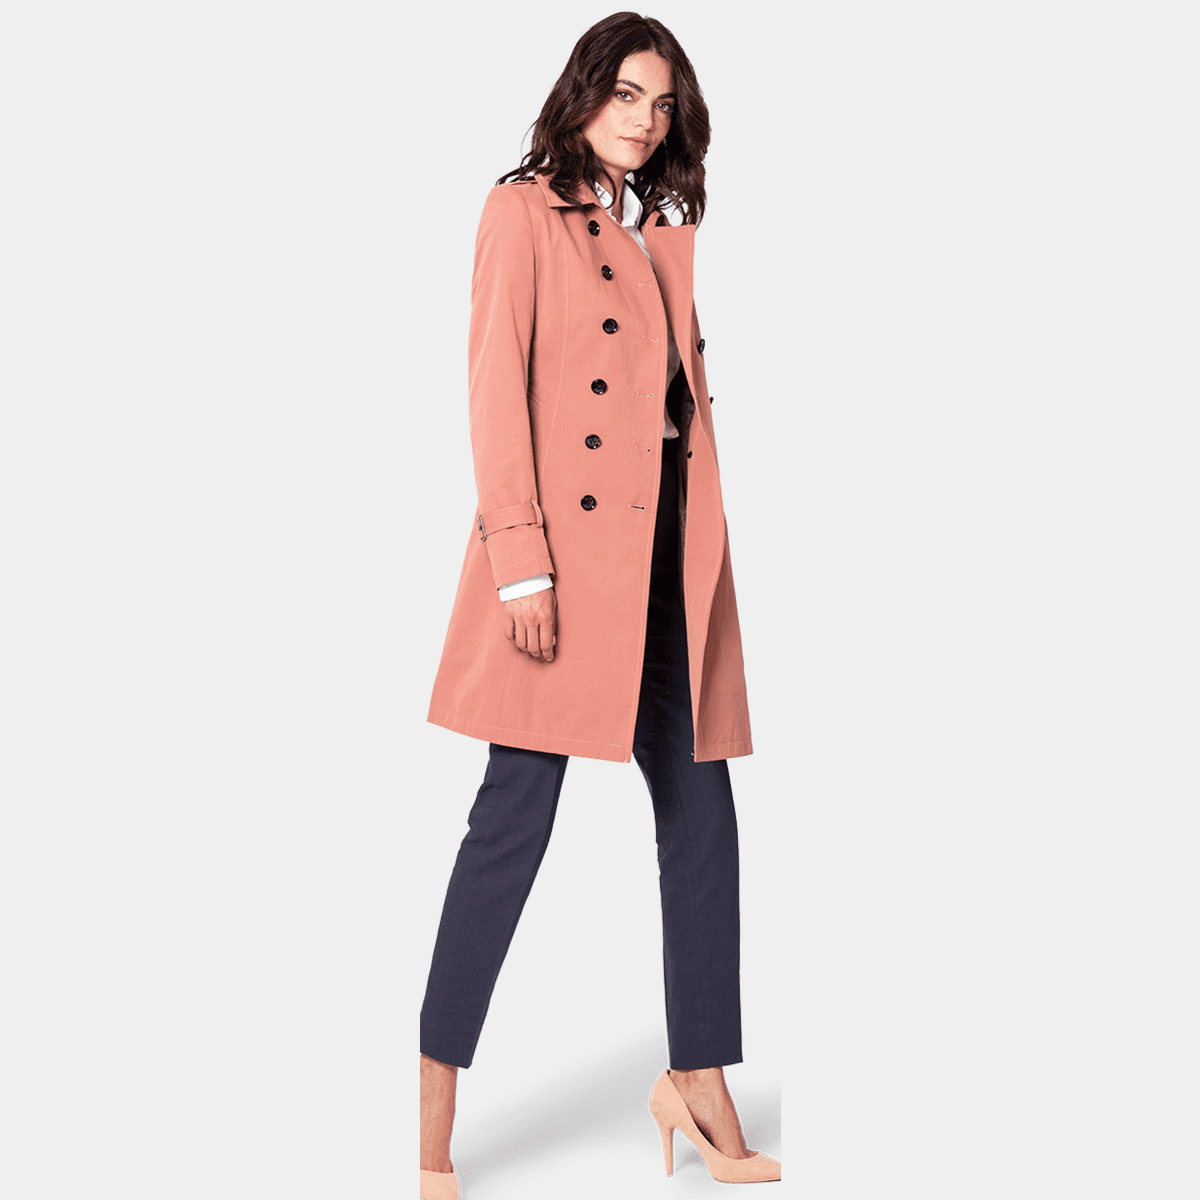 Women's Trench Coats | Tailor Made Trench Coats - Sumissura